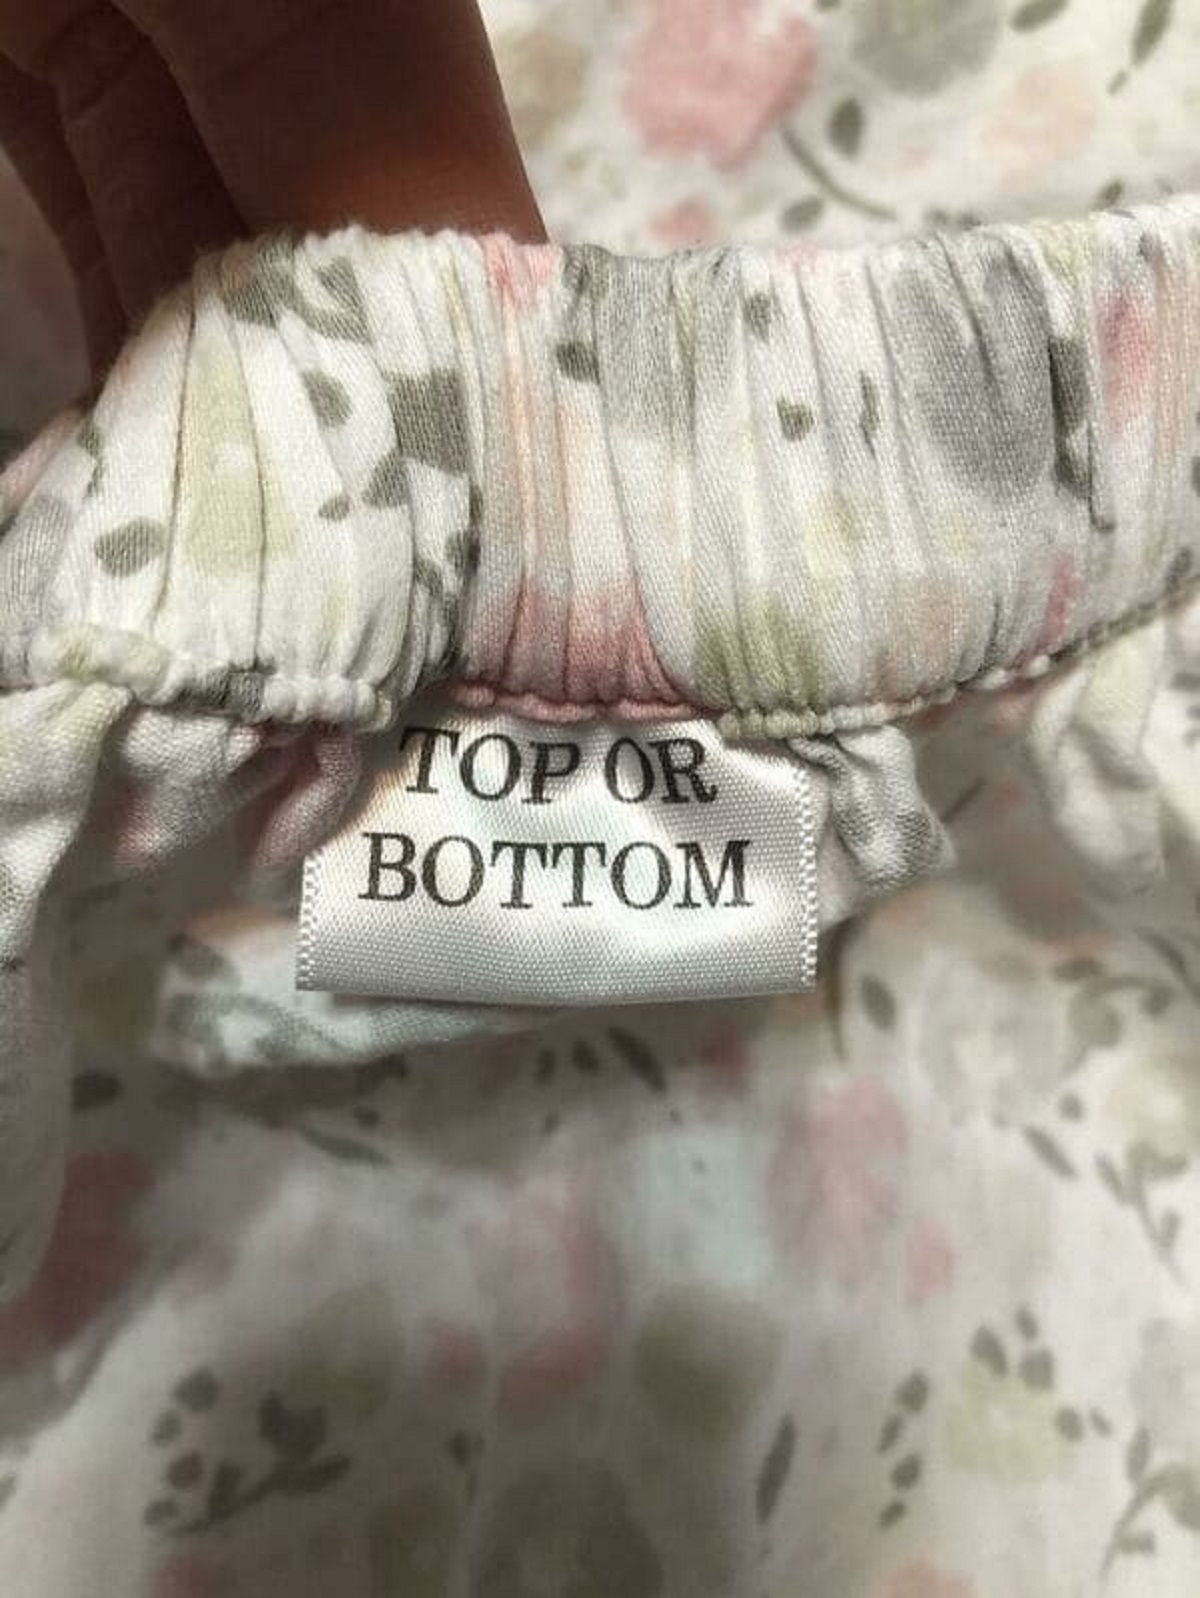 “My New Sheets Have Tags On Each Side That Either Says ‘Side’ Or ‘Top Or Bottom'”